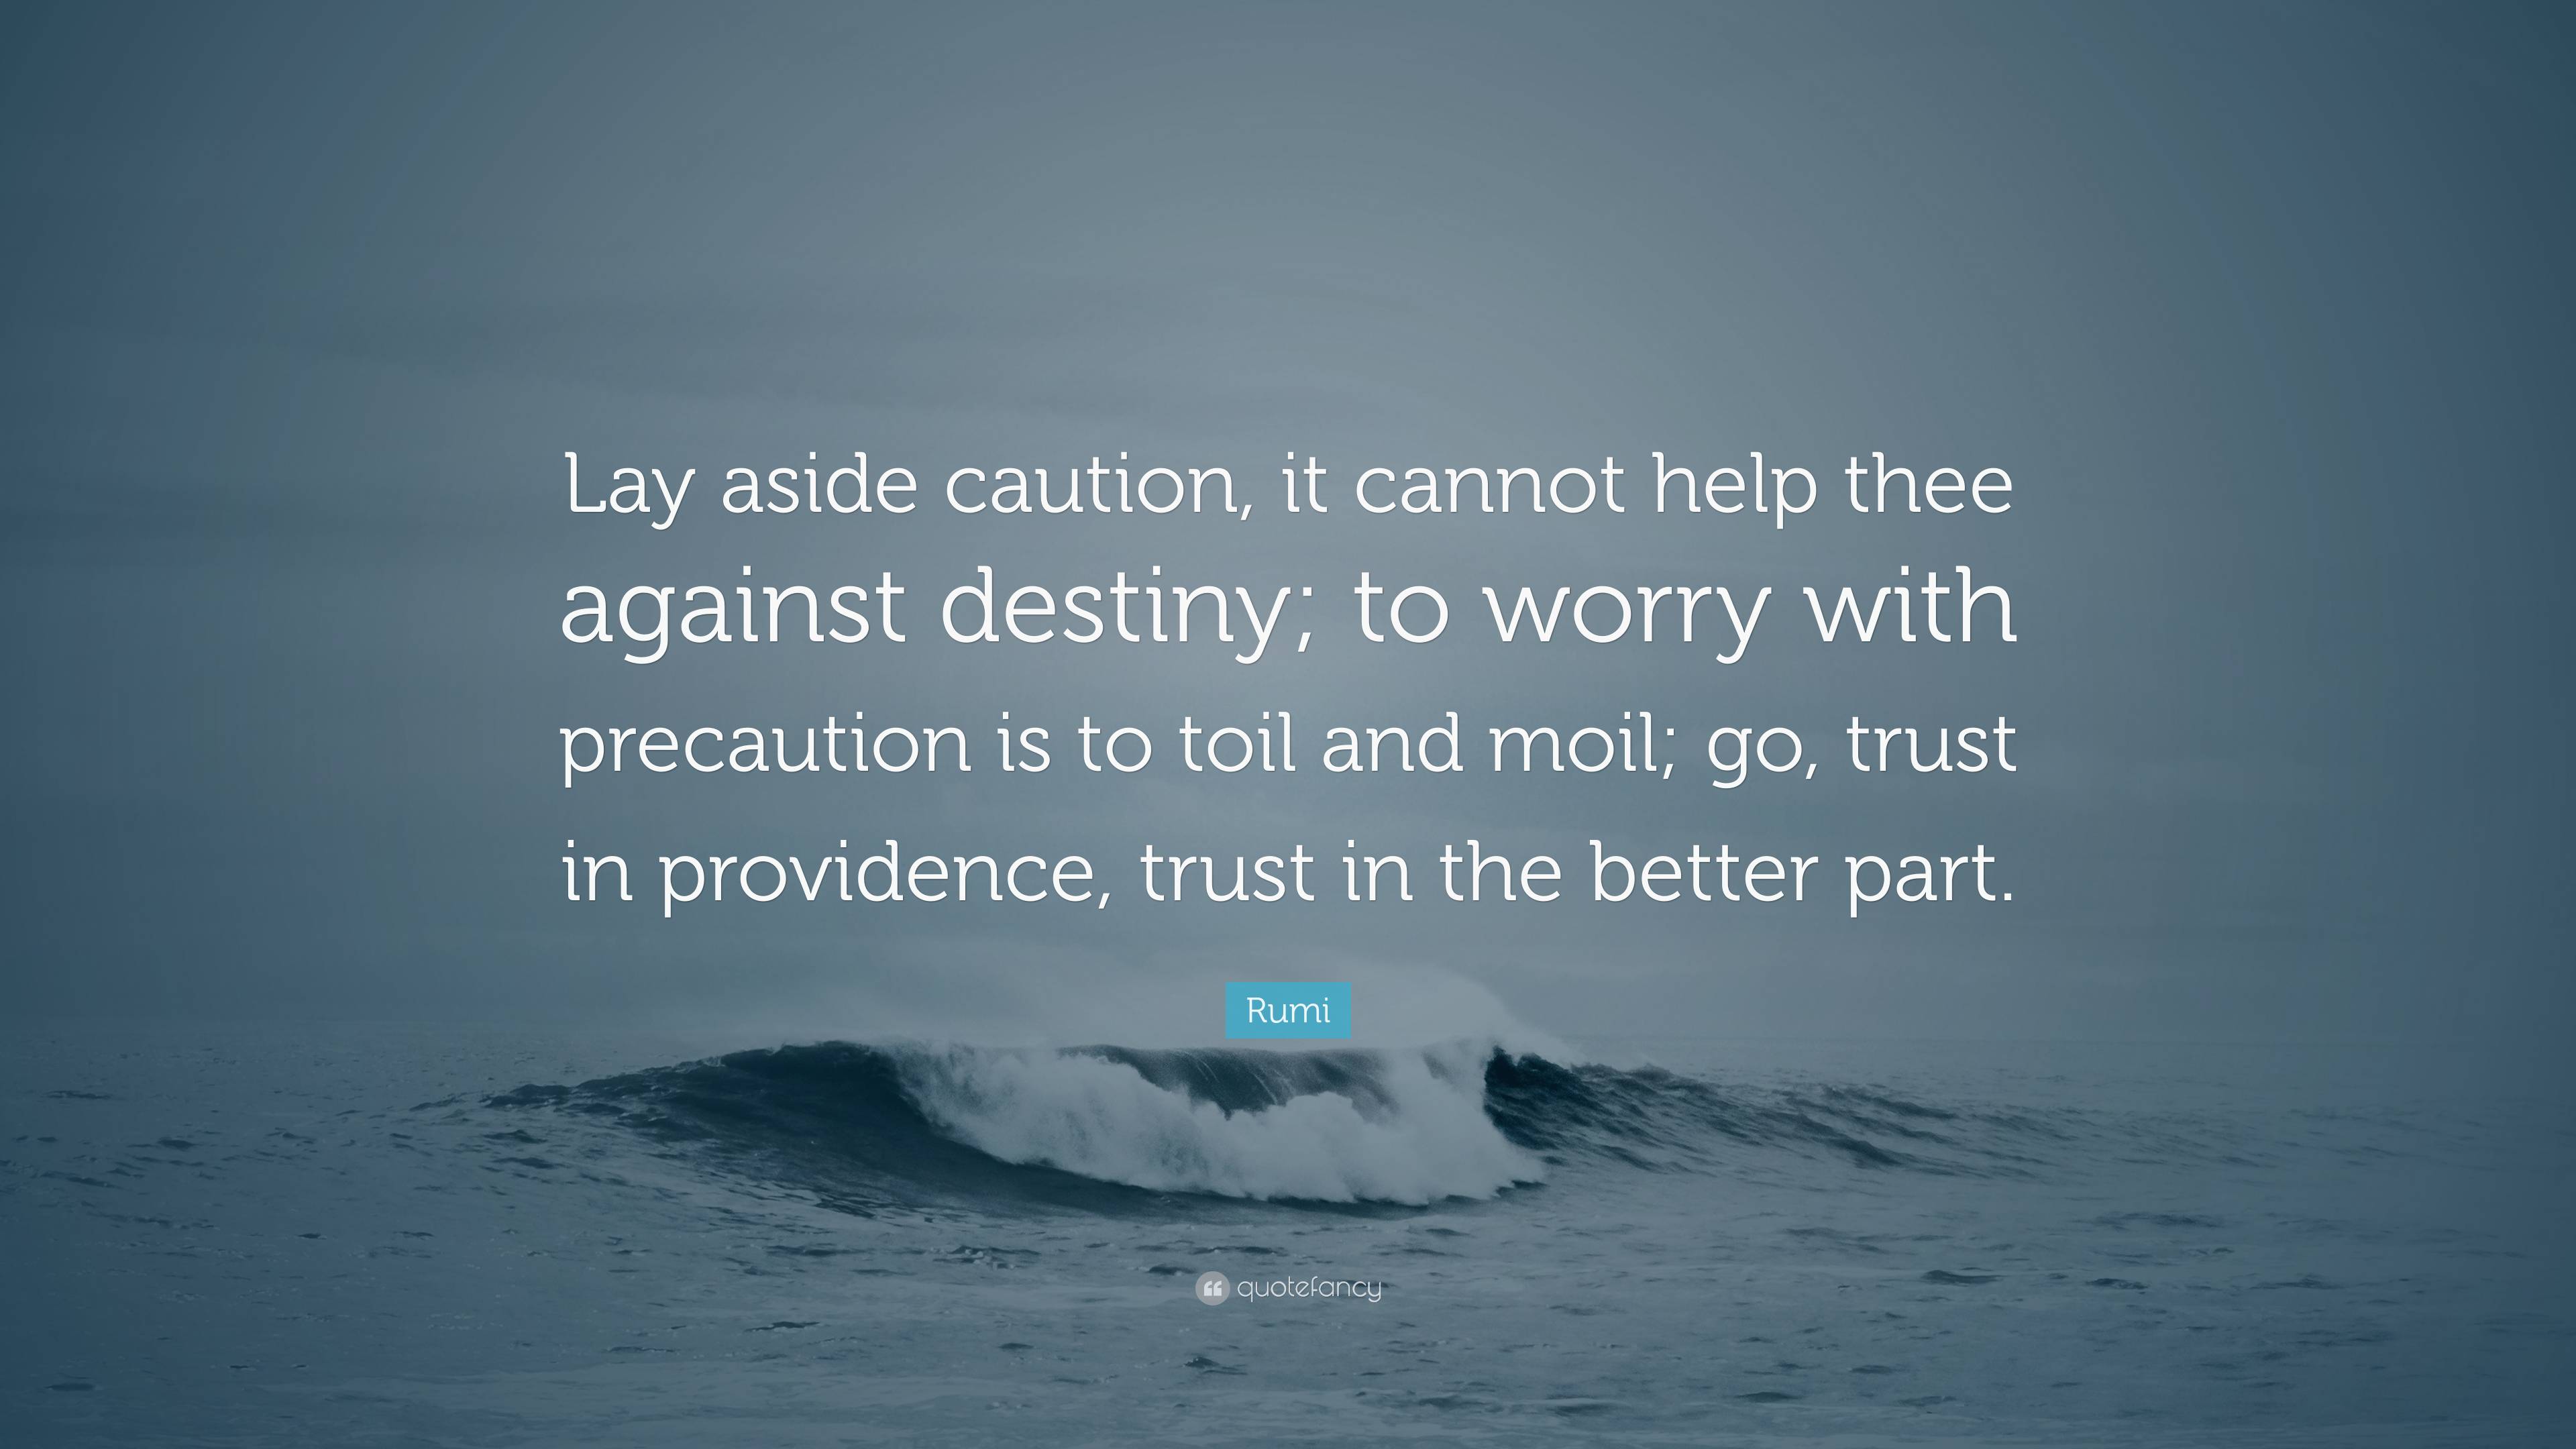 Rumi Quote: “Lay aside caution, it cannot help thee against destiny; to ...